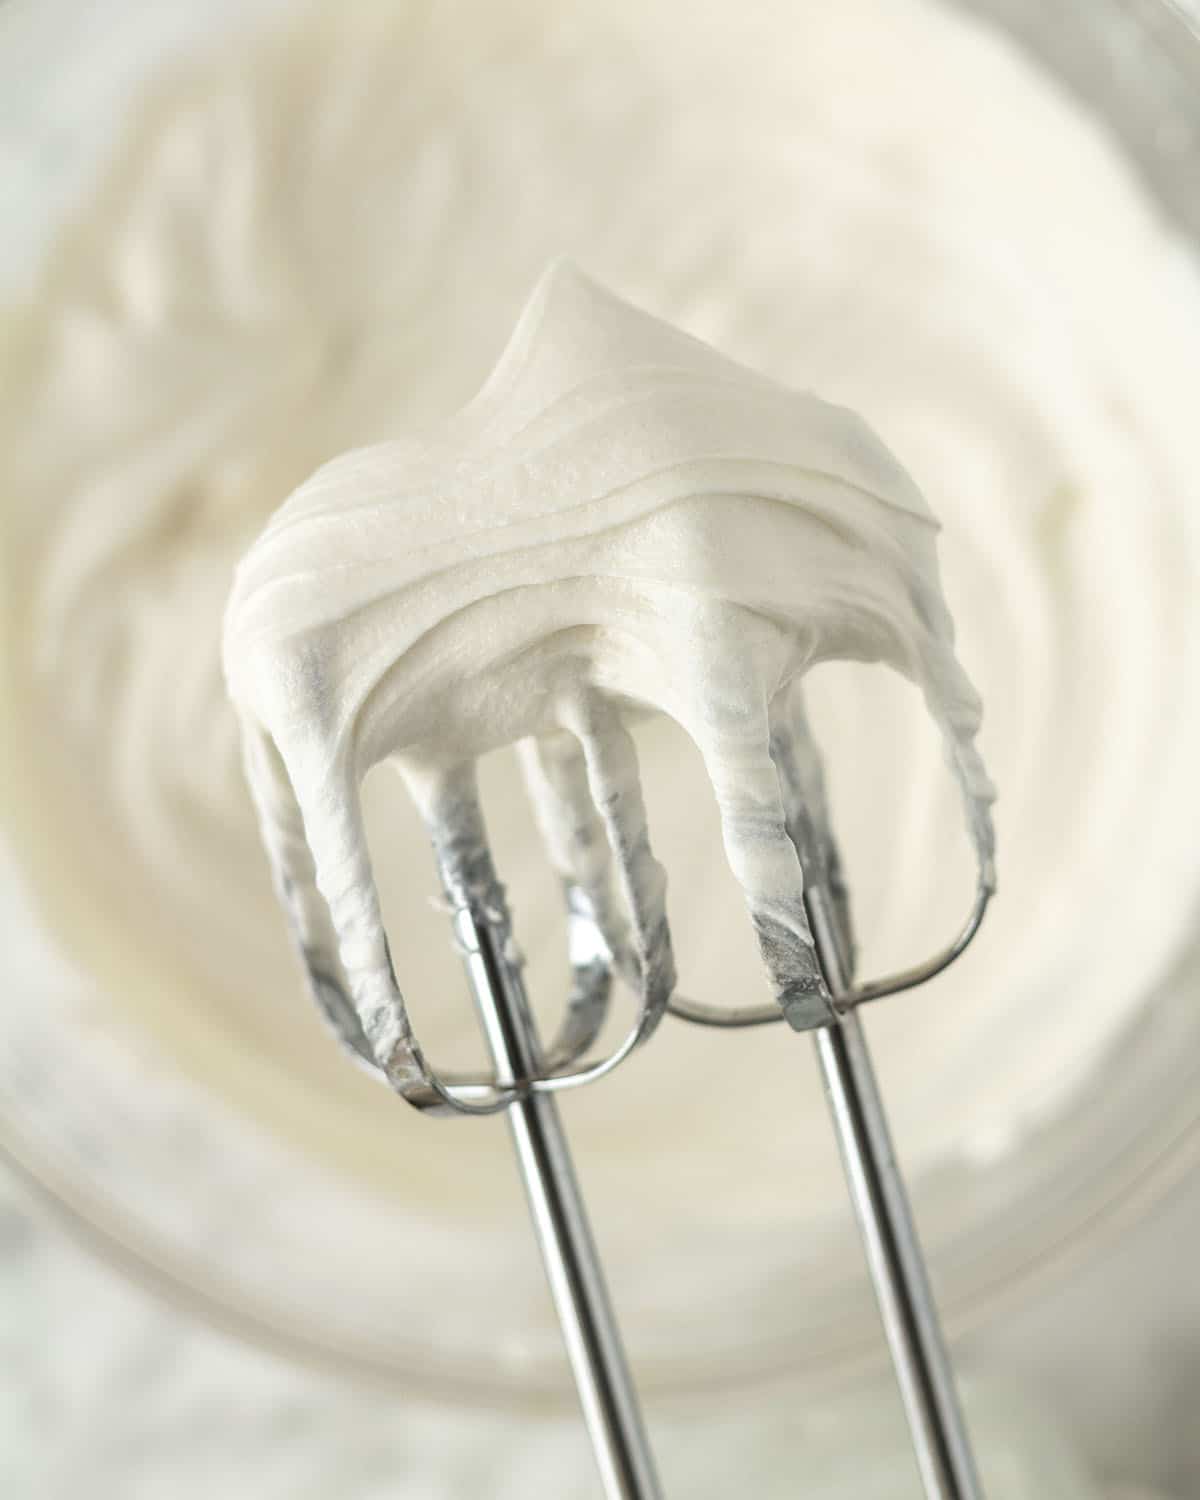 Image shows easy vegan cream cheese frosting on the beaters of an electric mixer.